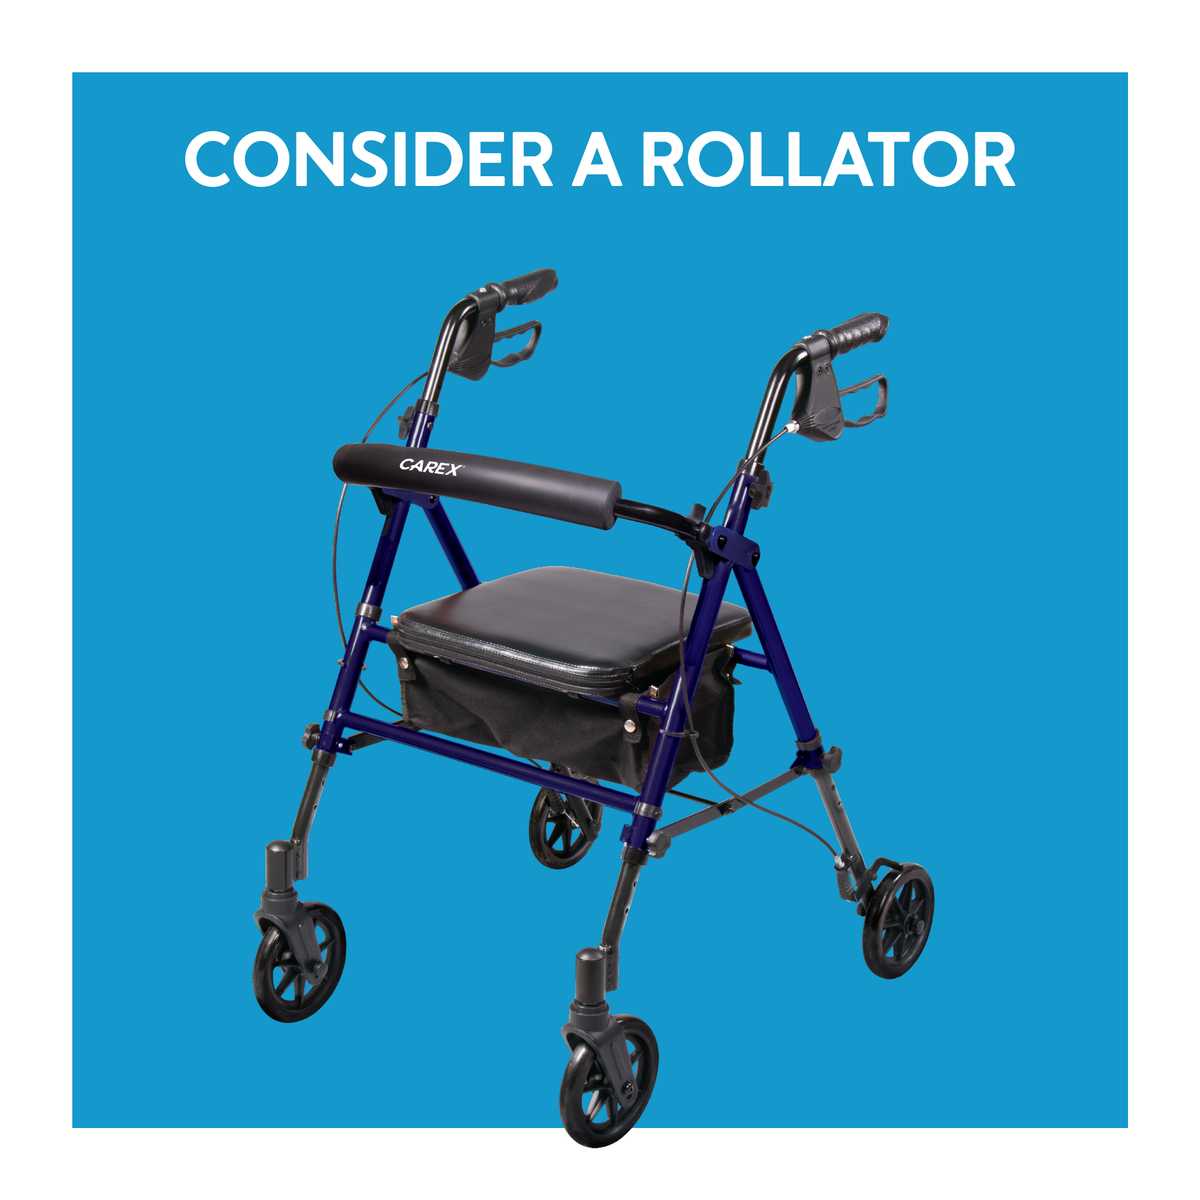 A blue rollator with text, “consider a rollator”